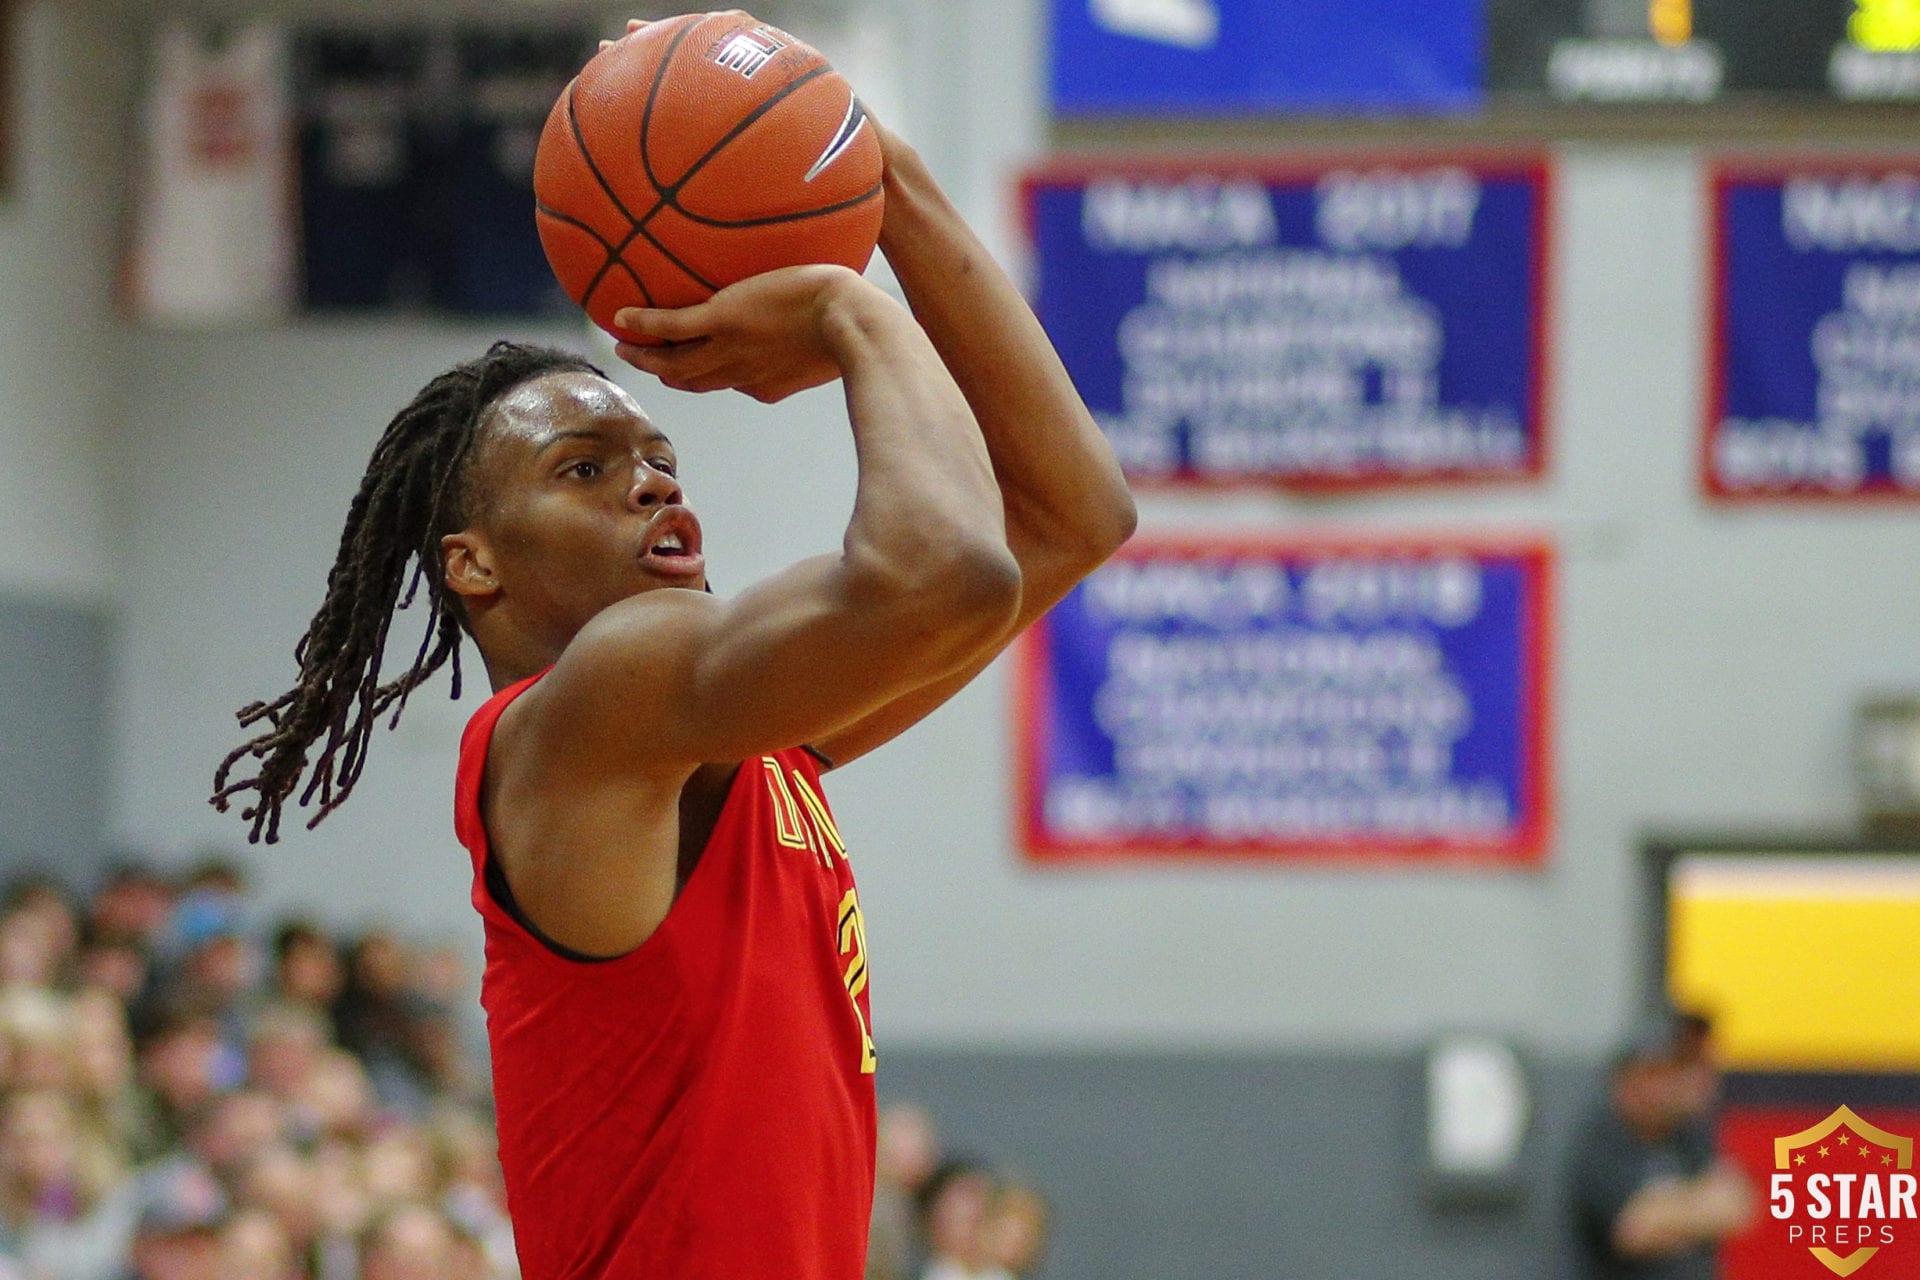 Oak Hill Academy's Christian Brown scored seven of his 11 points in the third quarter against Grace Christian on Dec. 15, 2018. (Photo: Danny Parker).